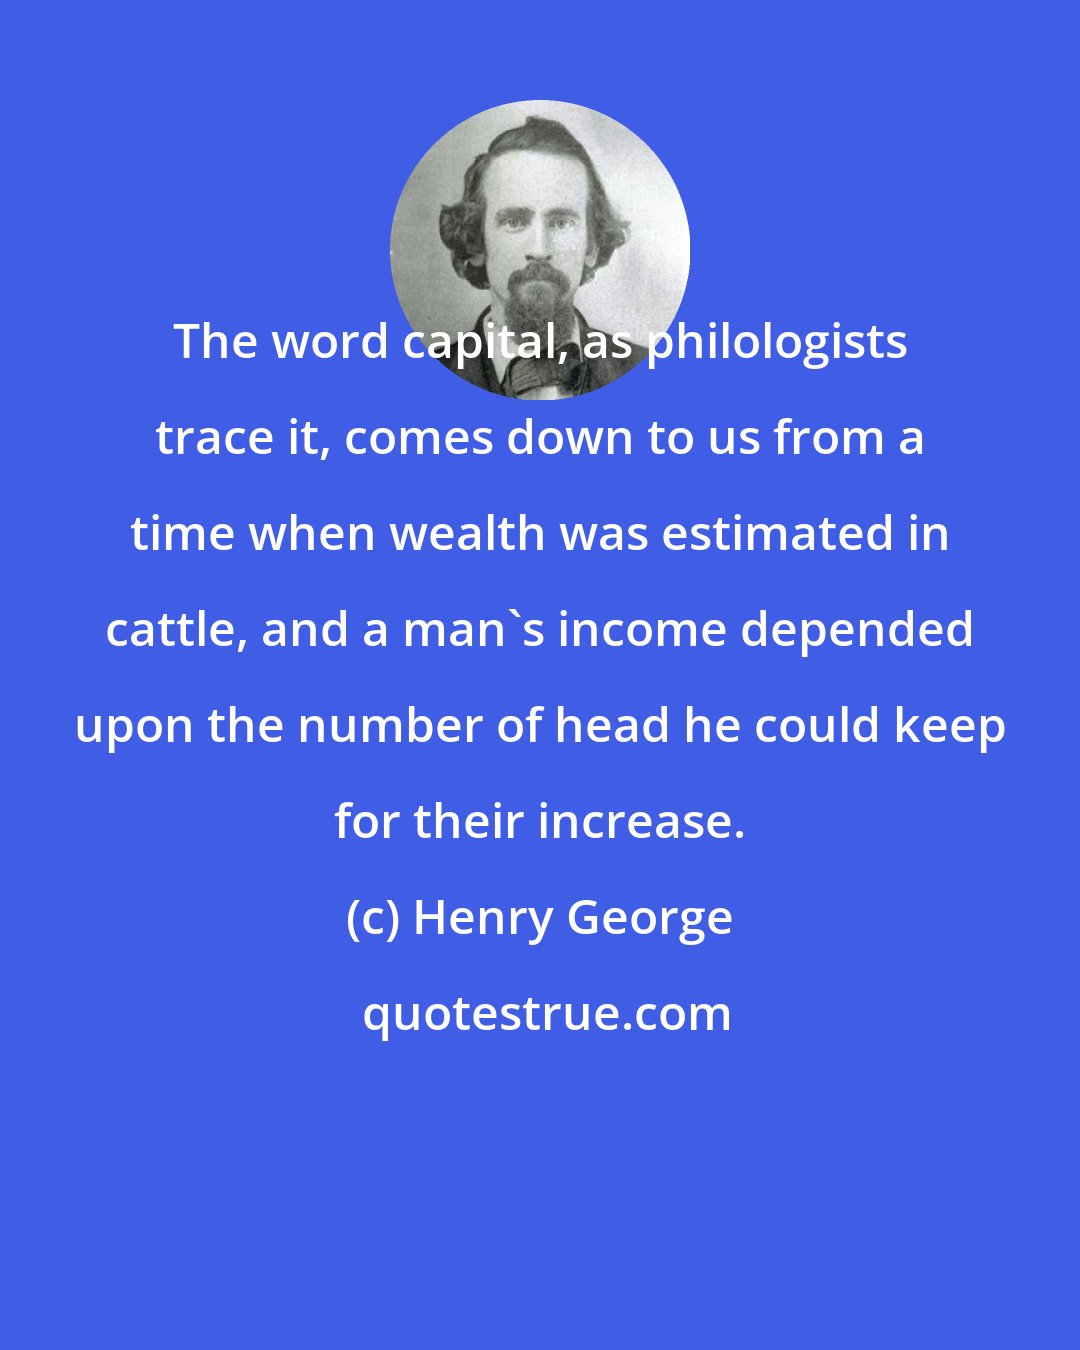 Henry George: The word capital, as philologists trace it, comes down to us from a time when wealth was estimated in cattle, and a man's income depended upon the number of head he could keep for their increase.